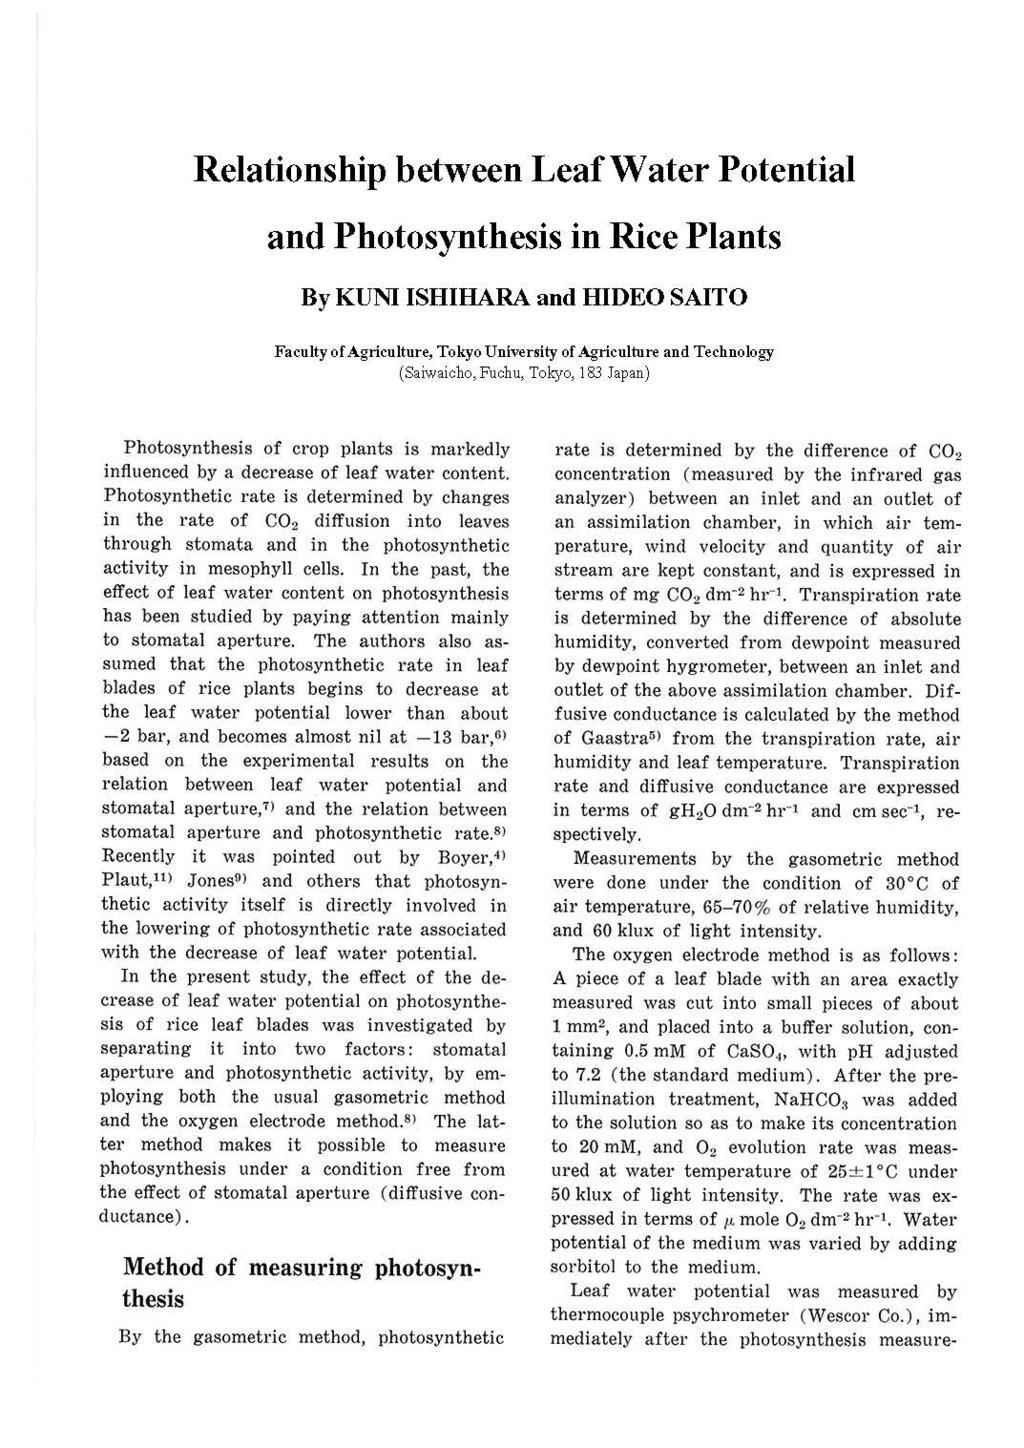 Relationship between Leaf Water Potential and Photosynthesis in Rice Plants By KUNI ISHIHARA and HIDEO SAITO Faculty of Agriculture, Tokyo University of Agriculture and Technology (Saiwaicho,Fuchu,